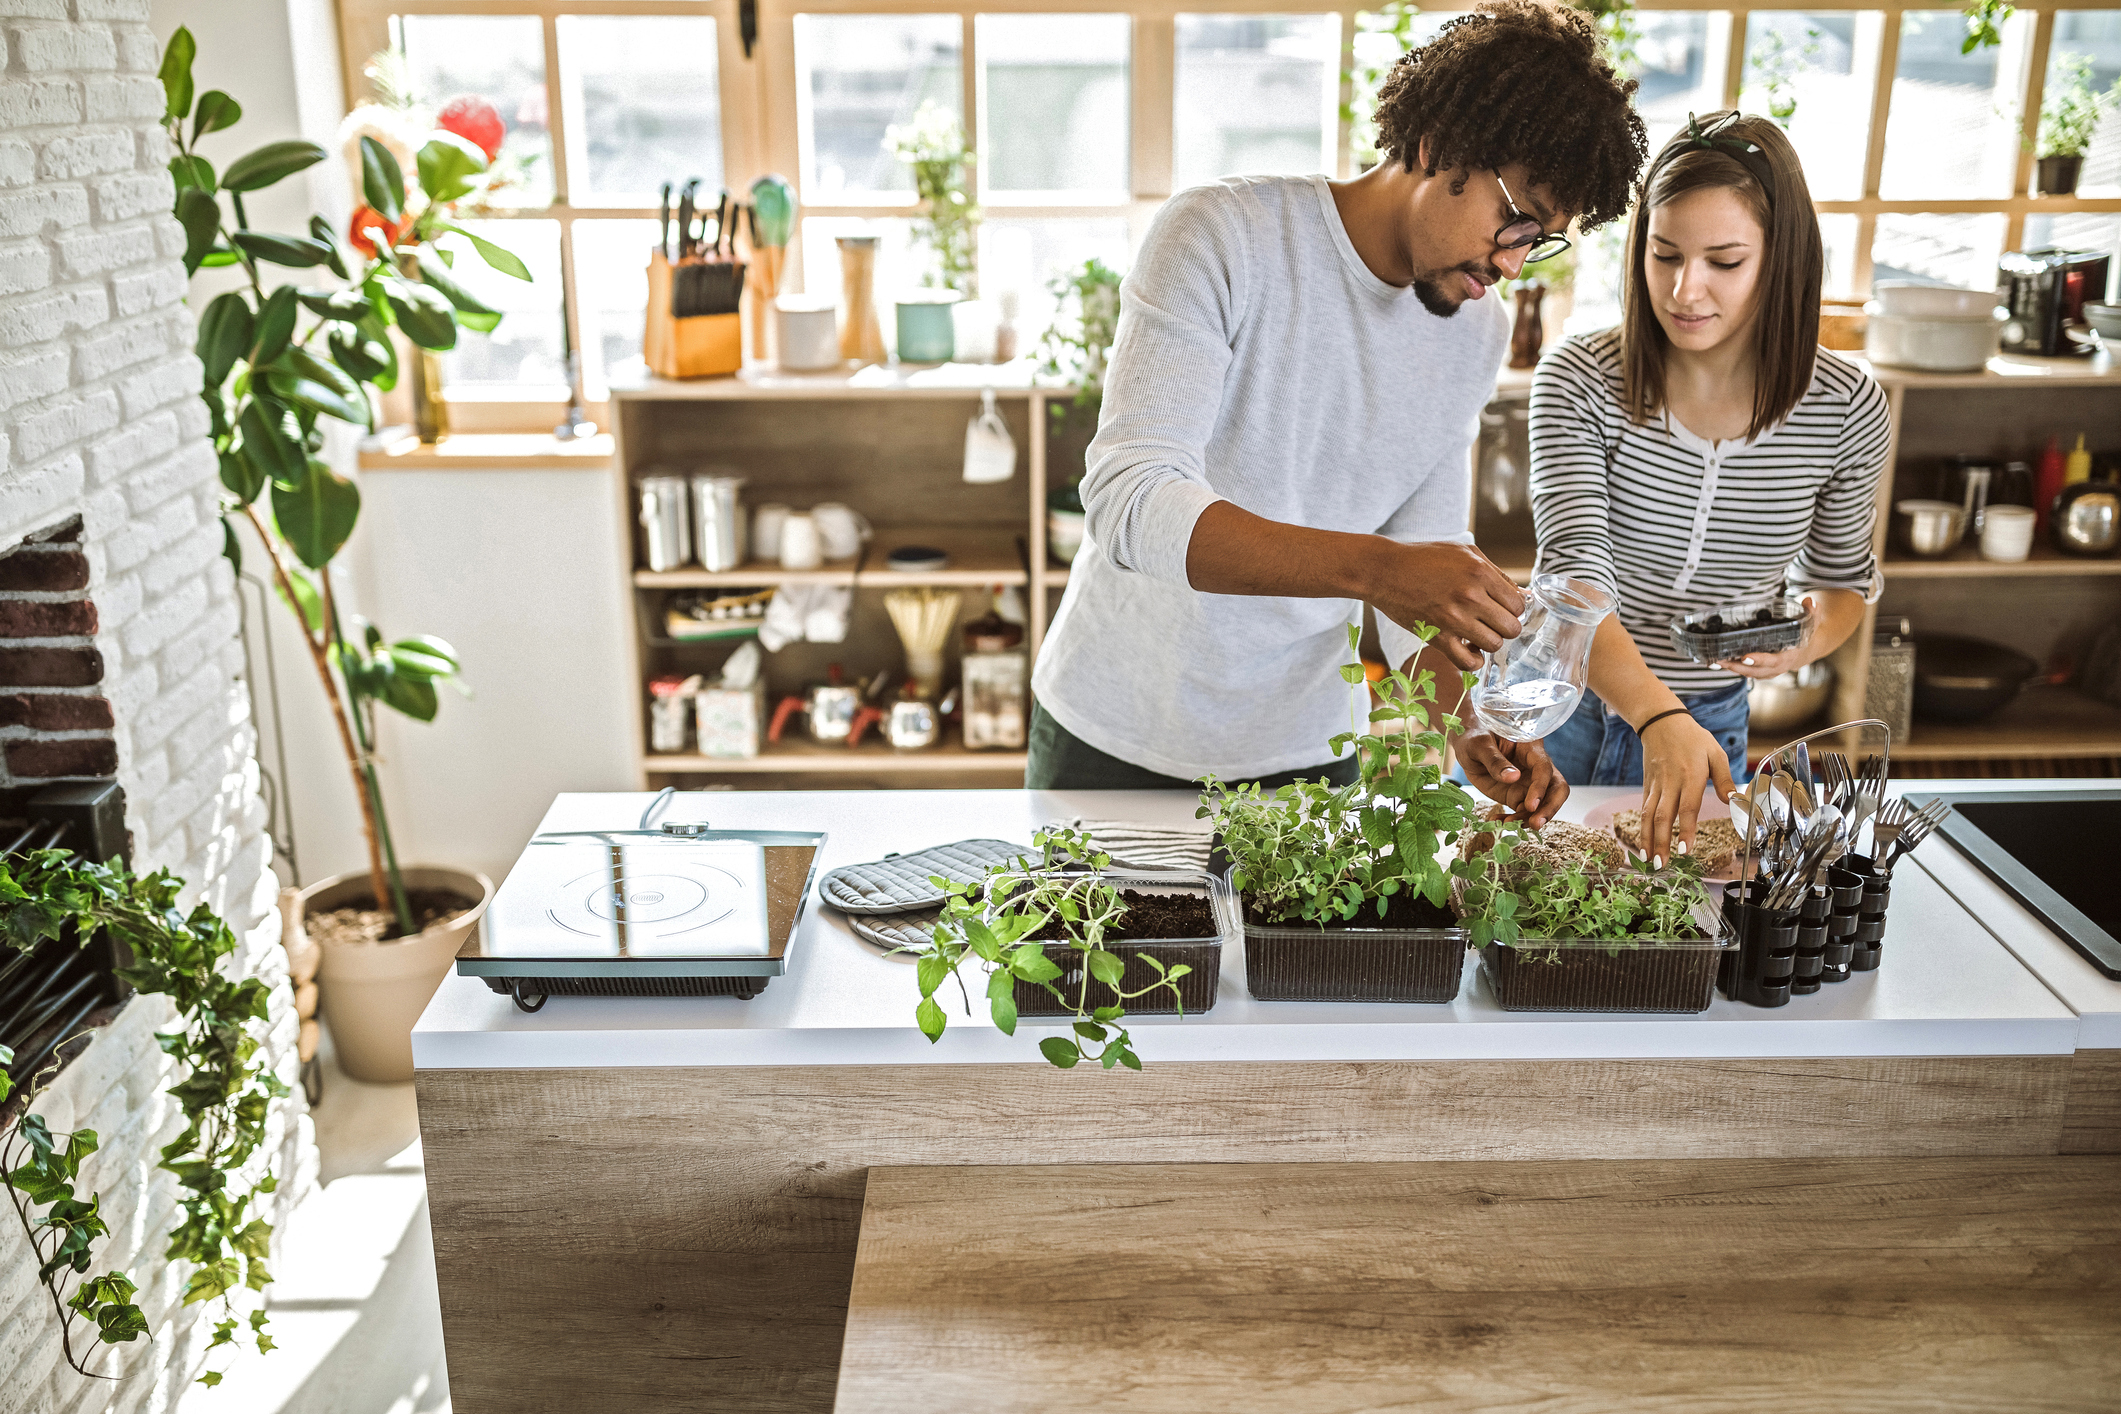 A young man and a woman take care of their kitchen herbs and houseplants.